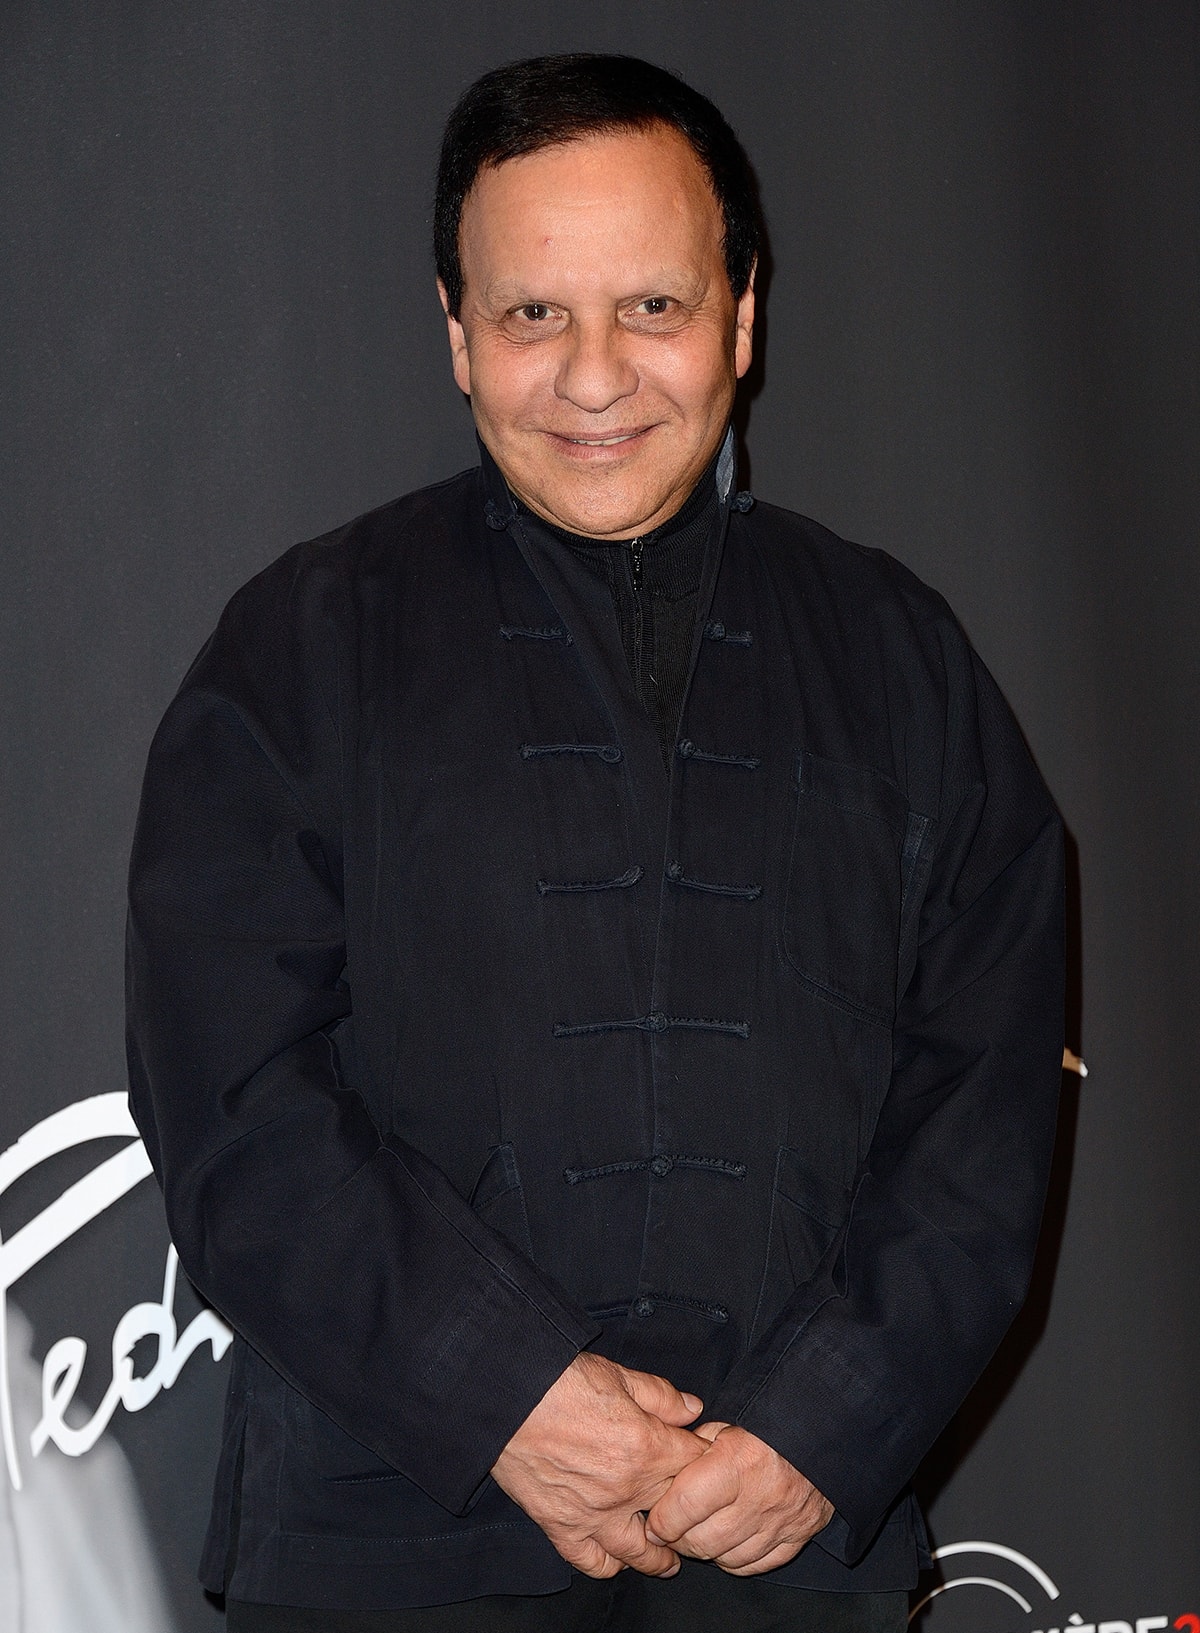 Azzedine Alaïa is a Tunisian designer who moved to Paris and opened his first atelier in the late 1970s after working for Christian Dior, Guy Laroche, and Thierry Mugler